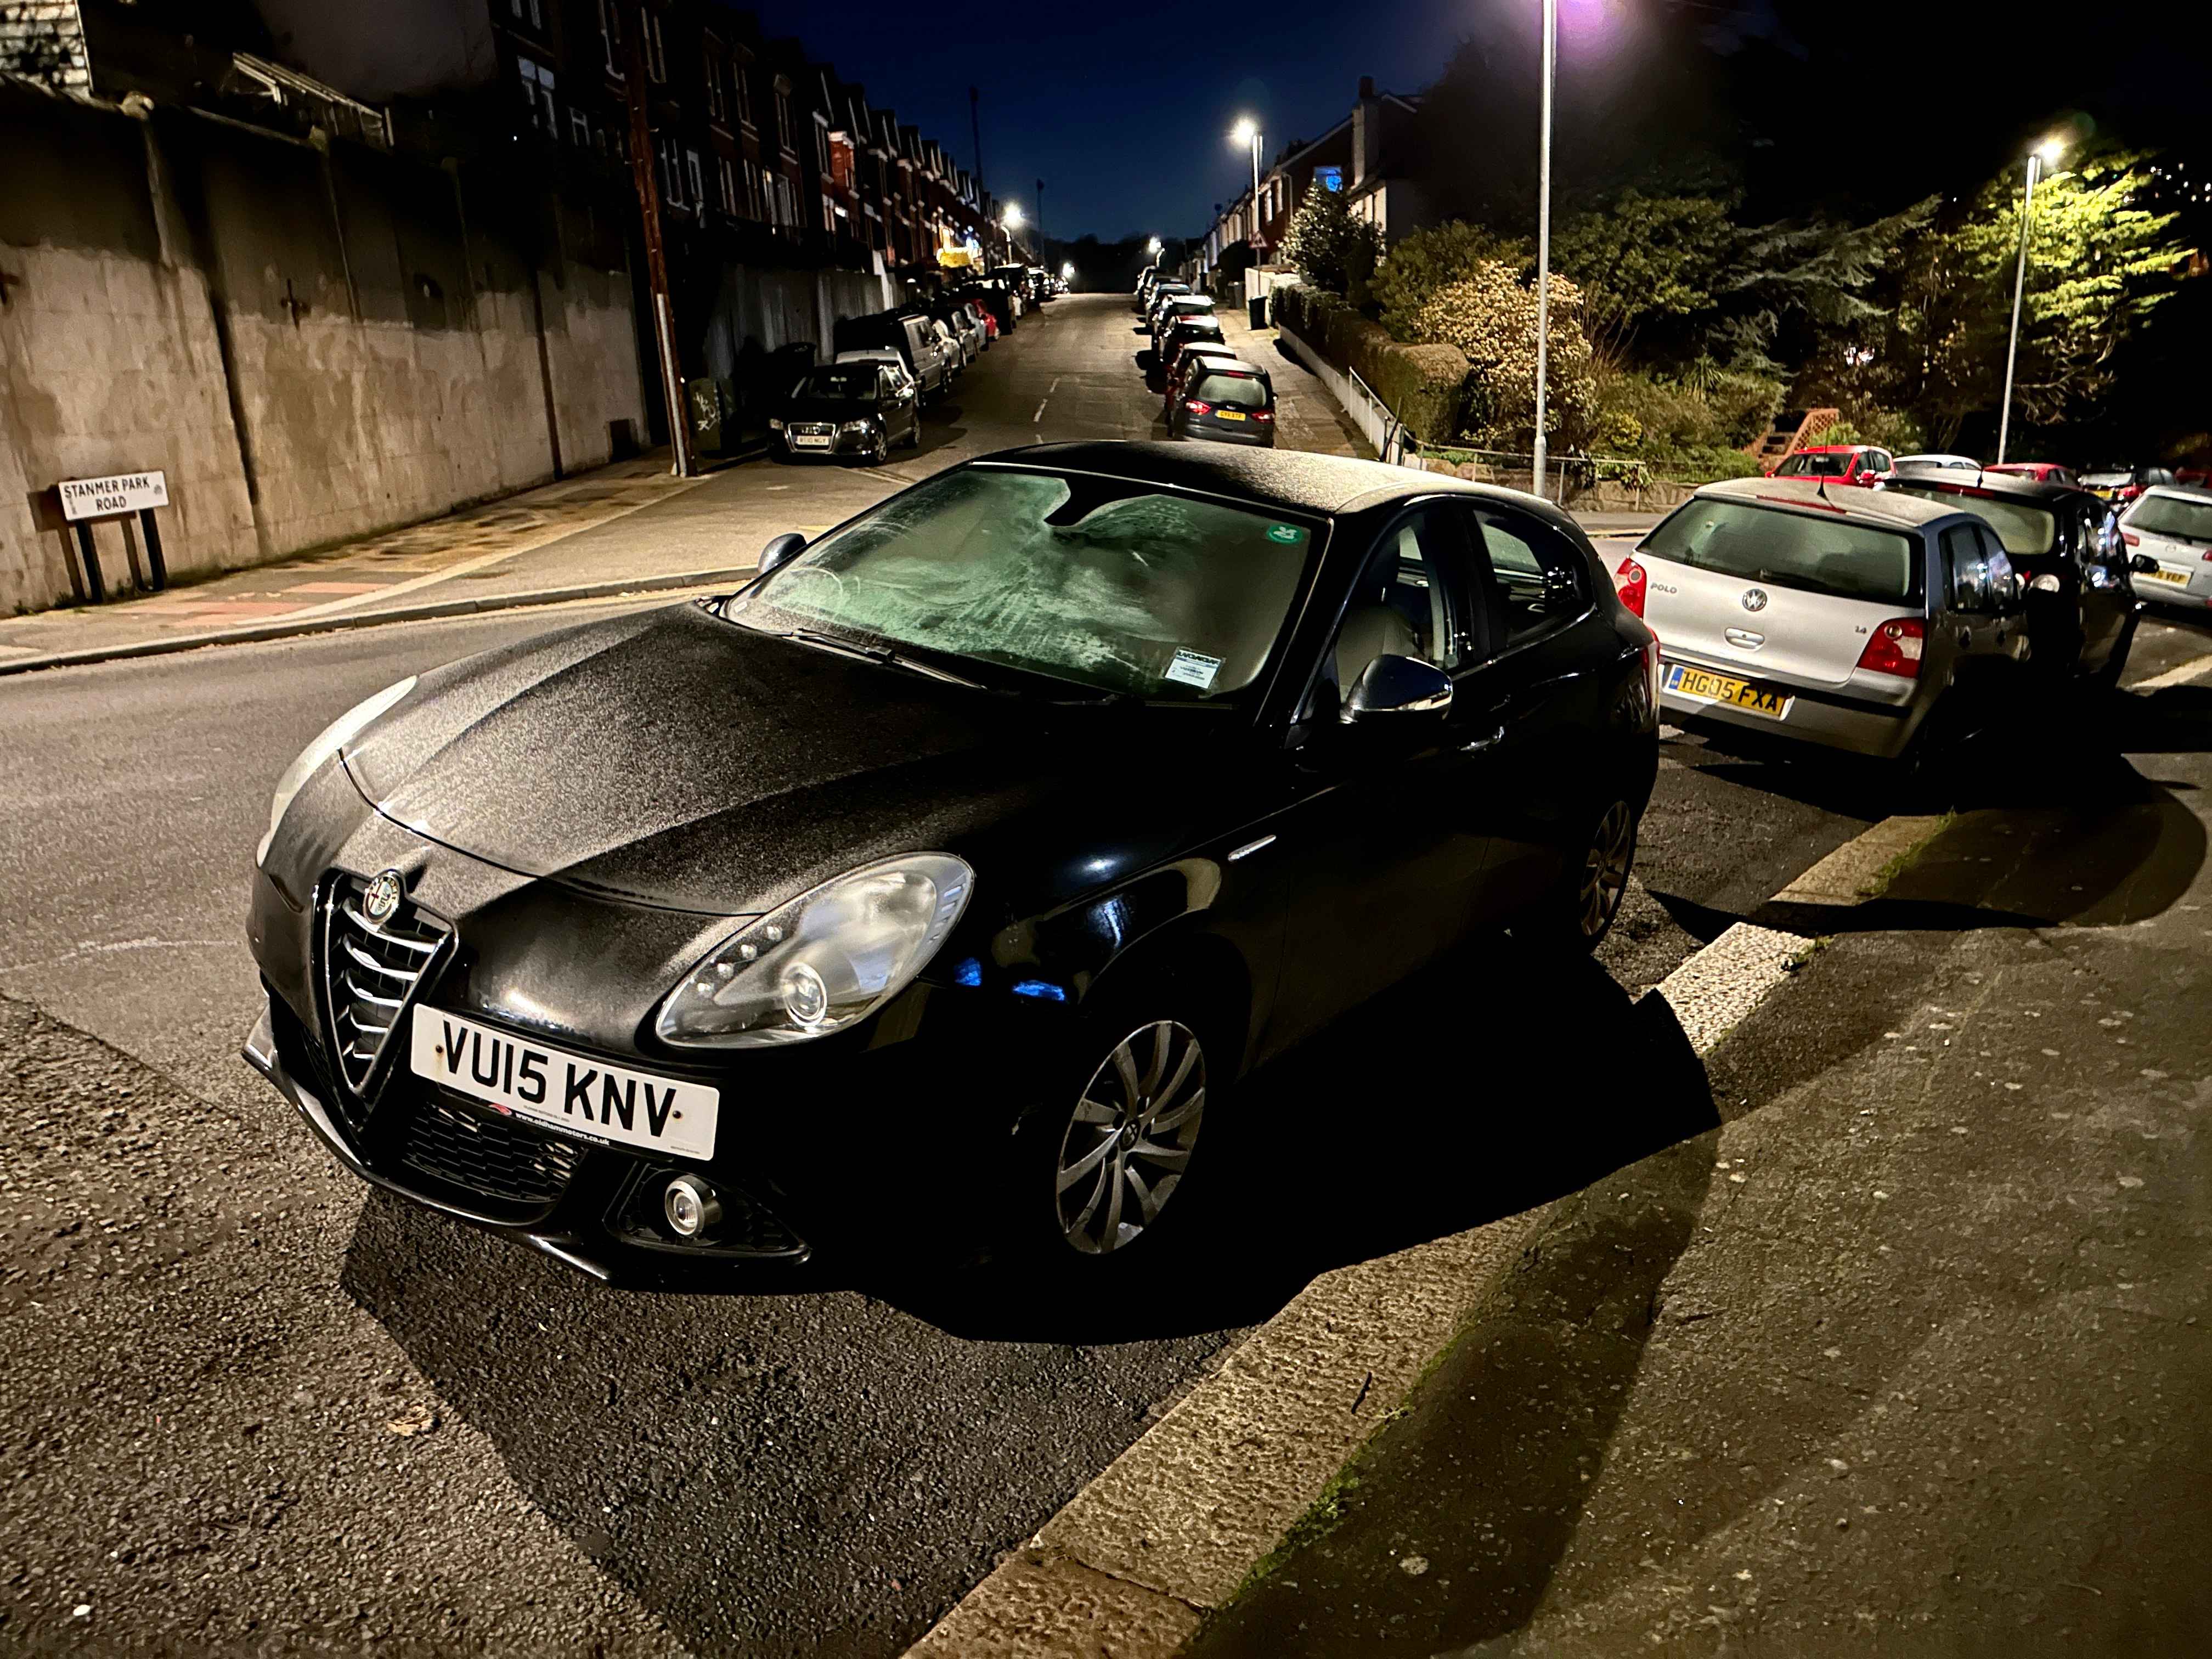 Photograph of VU15 KNV - a Black Alfa Romeo Giulietta parked in Hollingdean by a non-resident. The seventh of ten photographs supplied by the residents of Hollingdean.